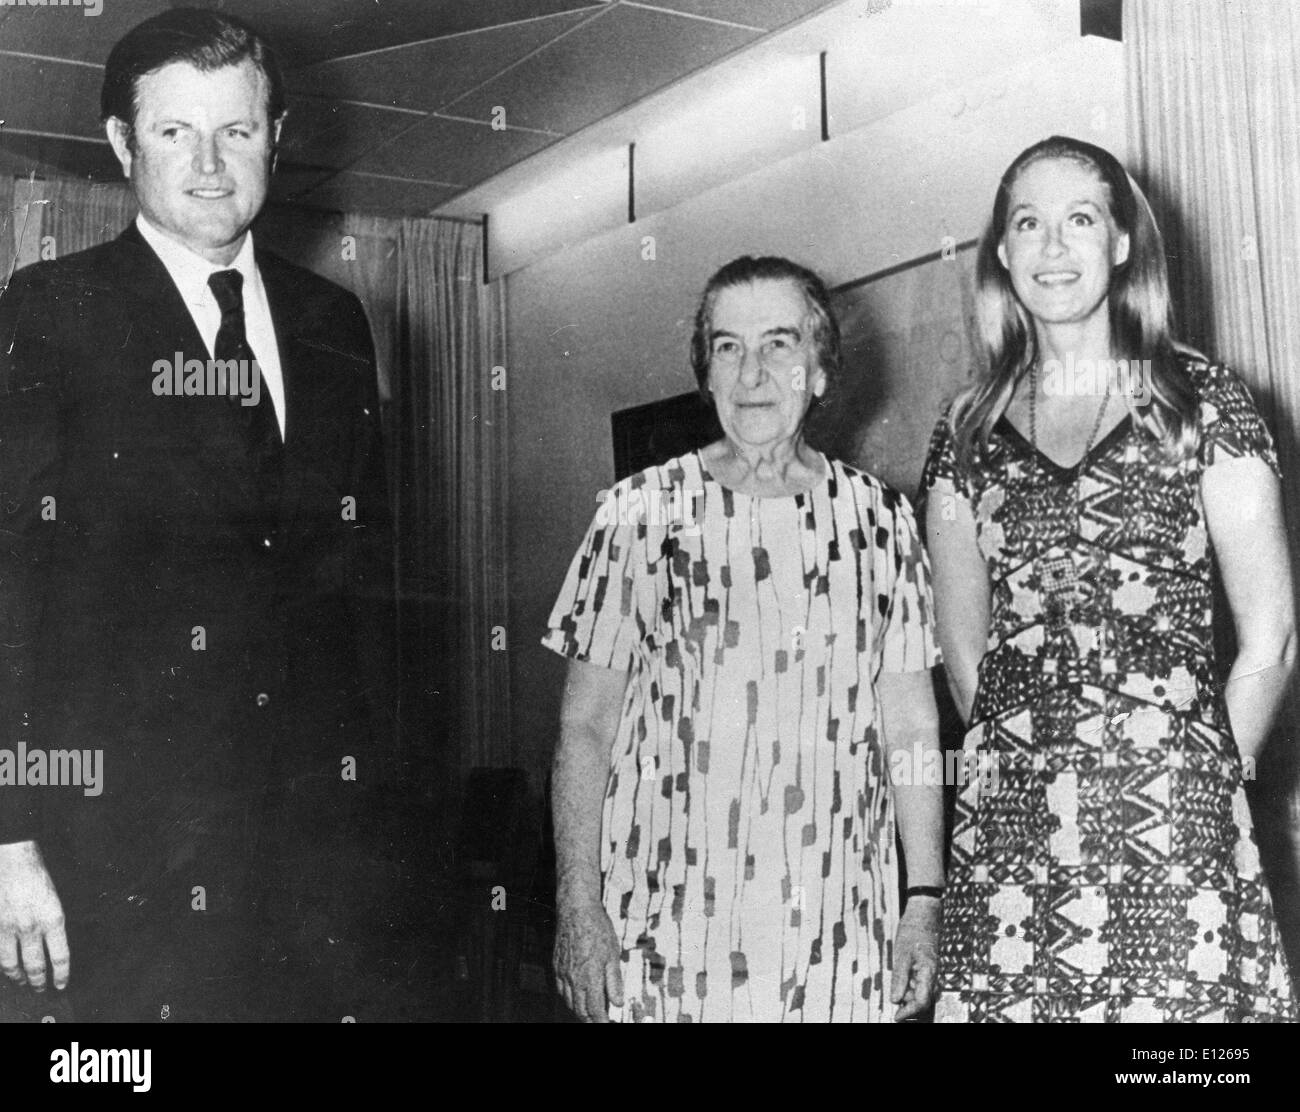 Dec 27, 2006; London, UK; TED KENNEDY with Mother ROSE and sister ROSEMARY. The Kennedy family is a prominent Irish-American family in American politics and government descending from the marriage of JOSEPH P. KENNEDY and ROSE FITZGERALD KENNEDY. The predominantly Democratic family is known for its US-style political liberalism. The best known Kennedy is the late President of the United States John F. Kennedy. The Kennedys are often compared to the Adams, Bush, and Taft families as among the most influential American political families Stock Photo